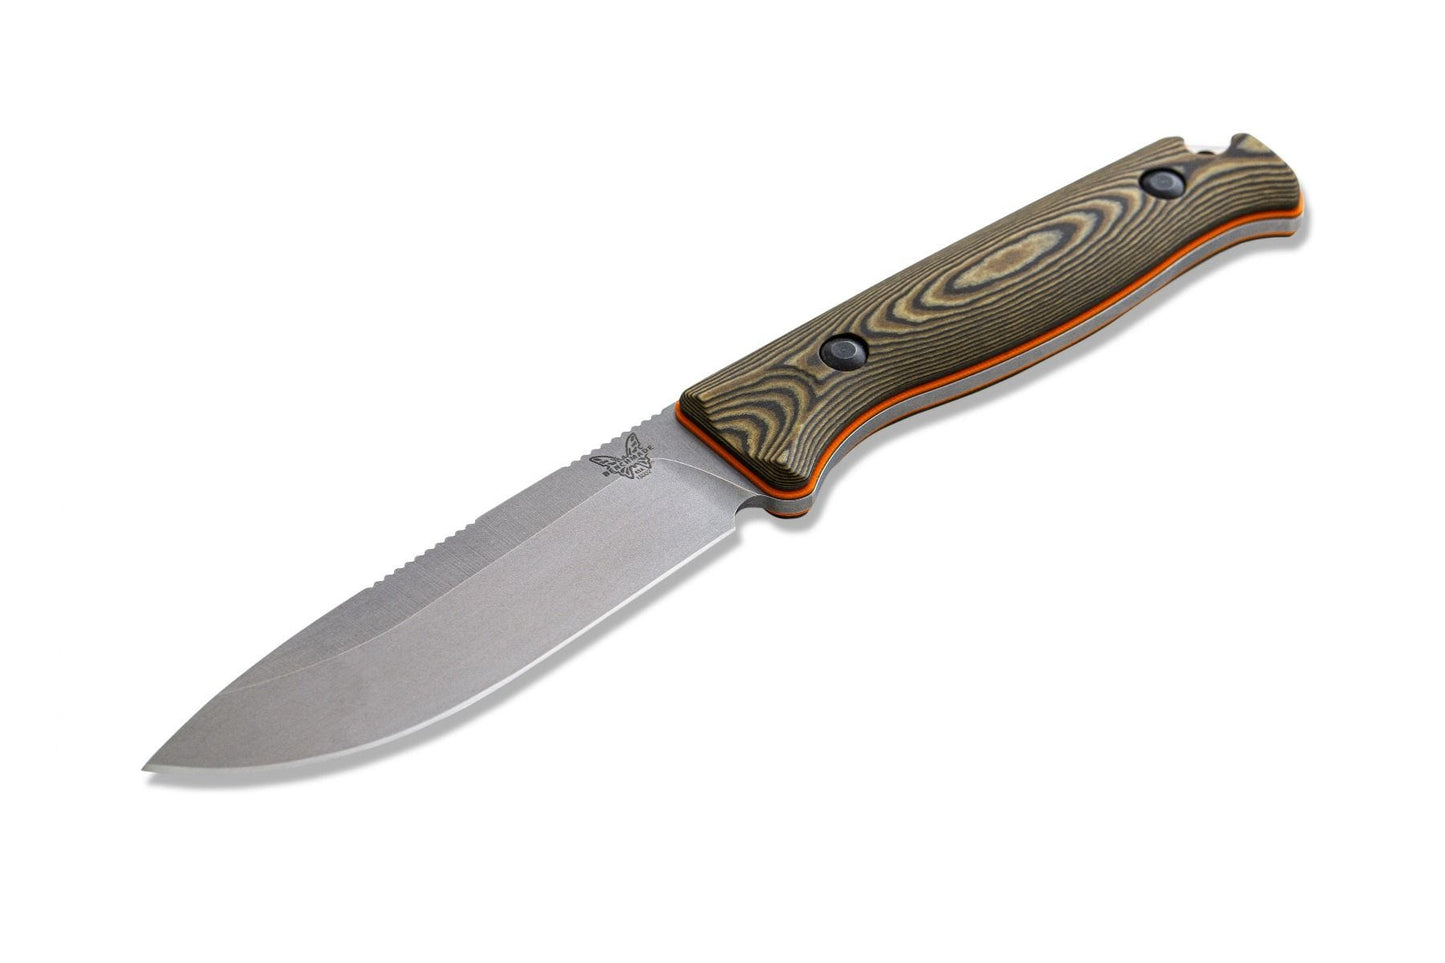 Benchmade 15002-1 Saddle Mountain Skinner 4.20" CPM-S90V Fixed Blade Knife with Boltaron Sheath